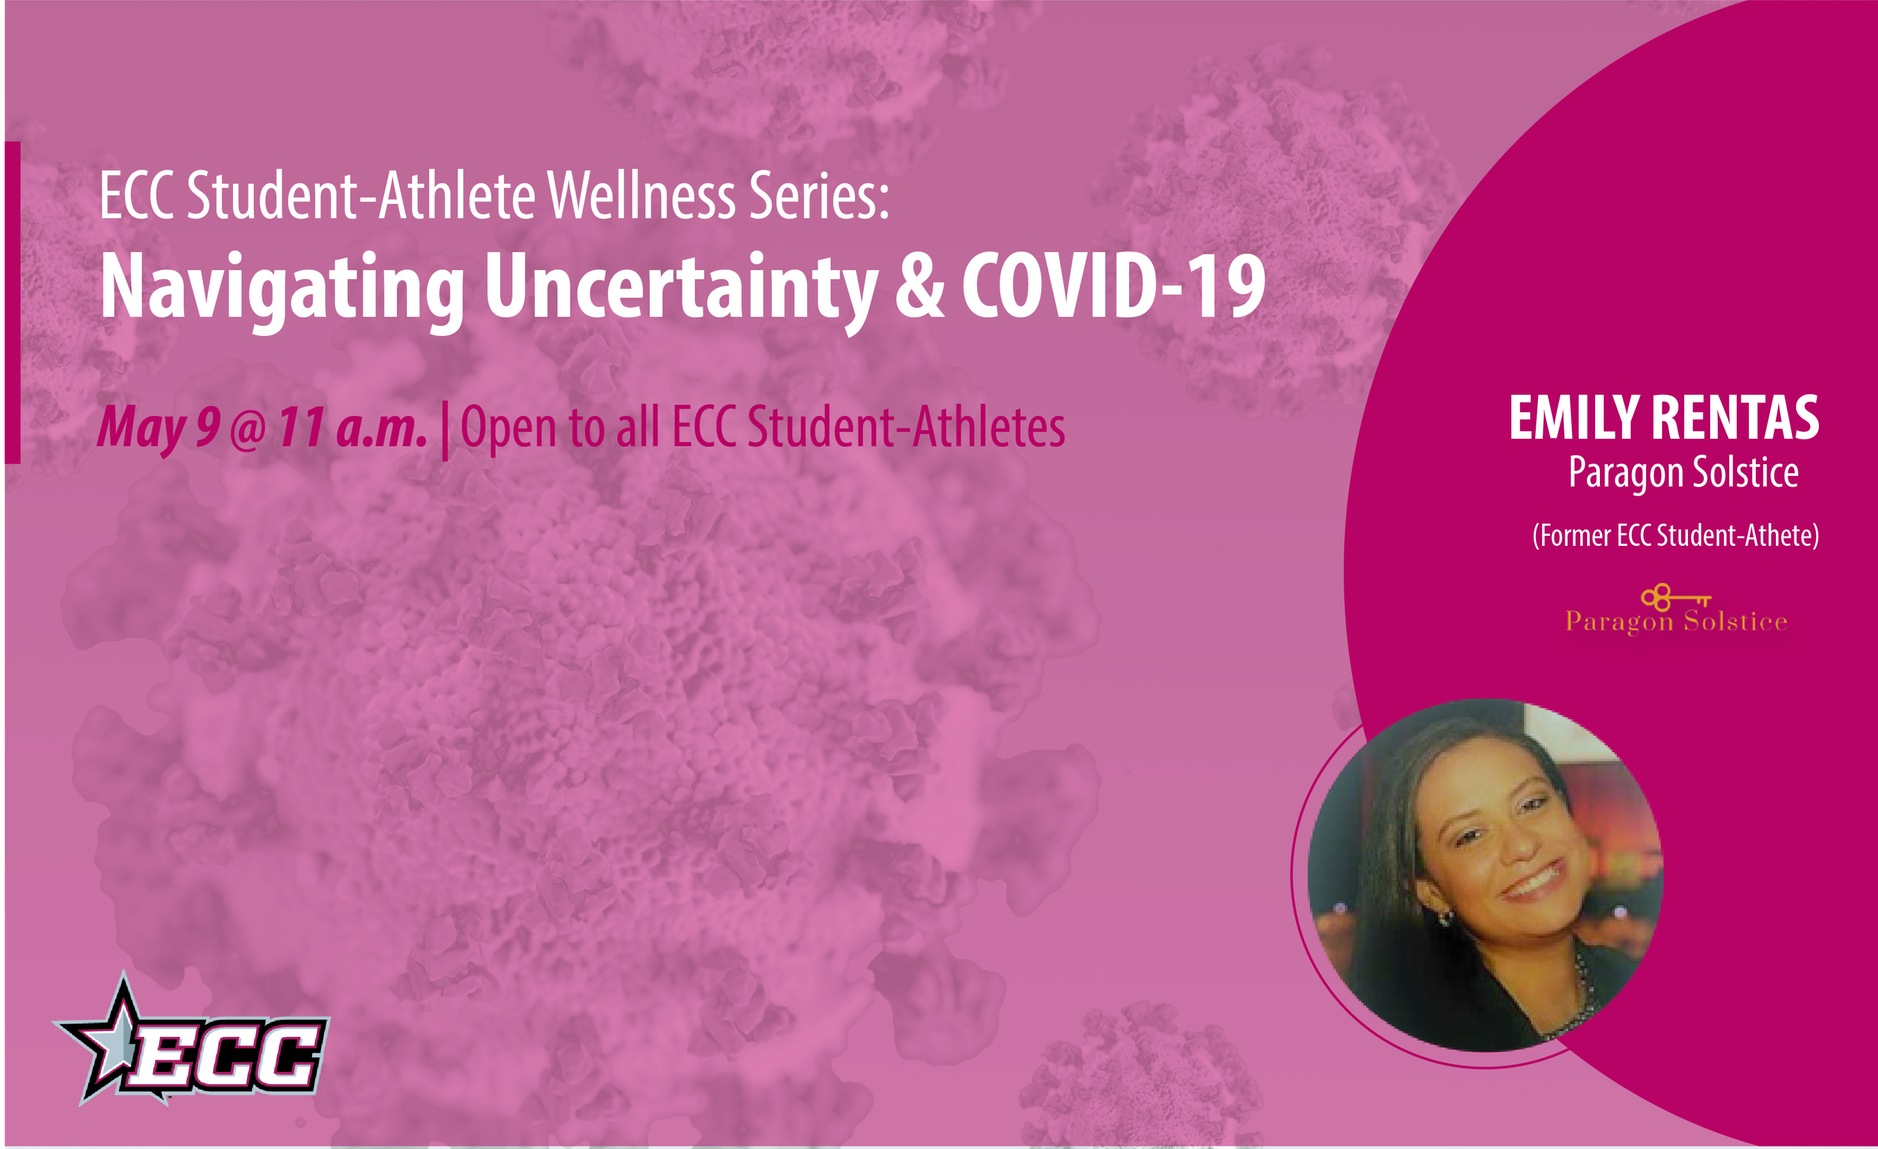 ECC to Host Interactive Webinar for Student-Athletes on Mental Health and Managing Stress